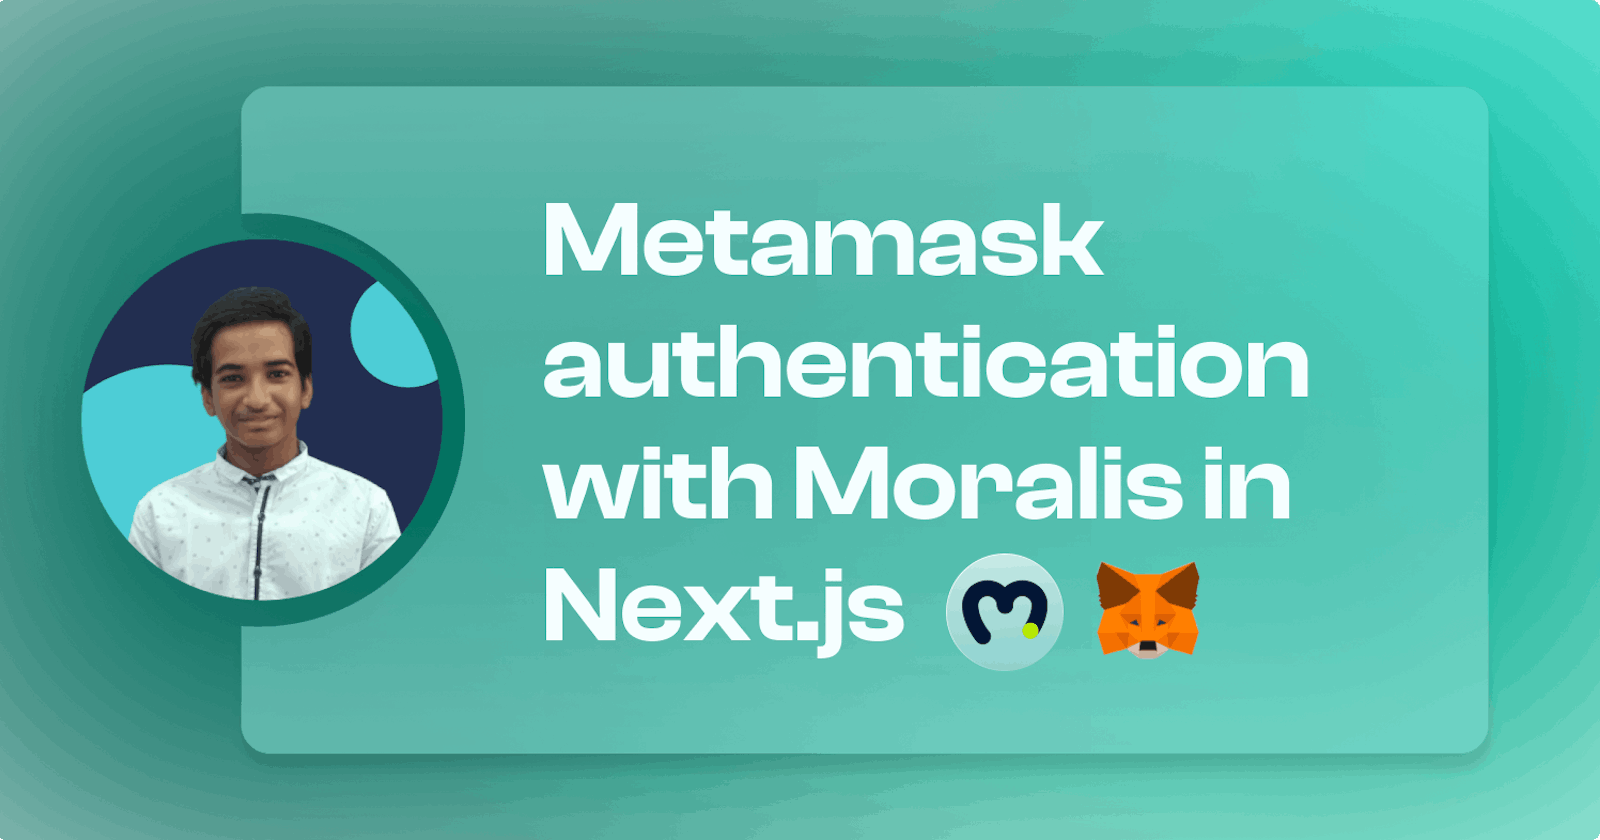 Metamask authentication with Moralis in Next.js